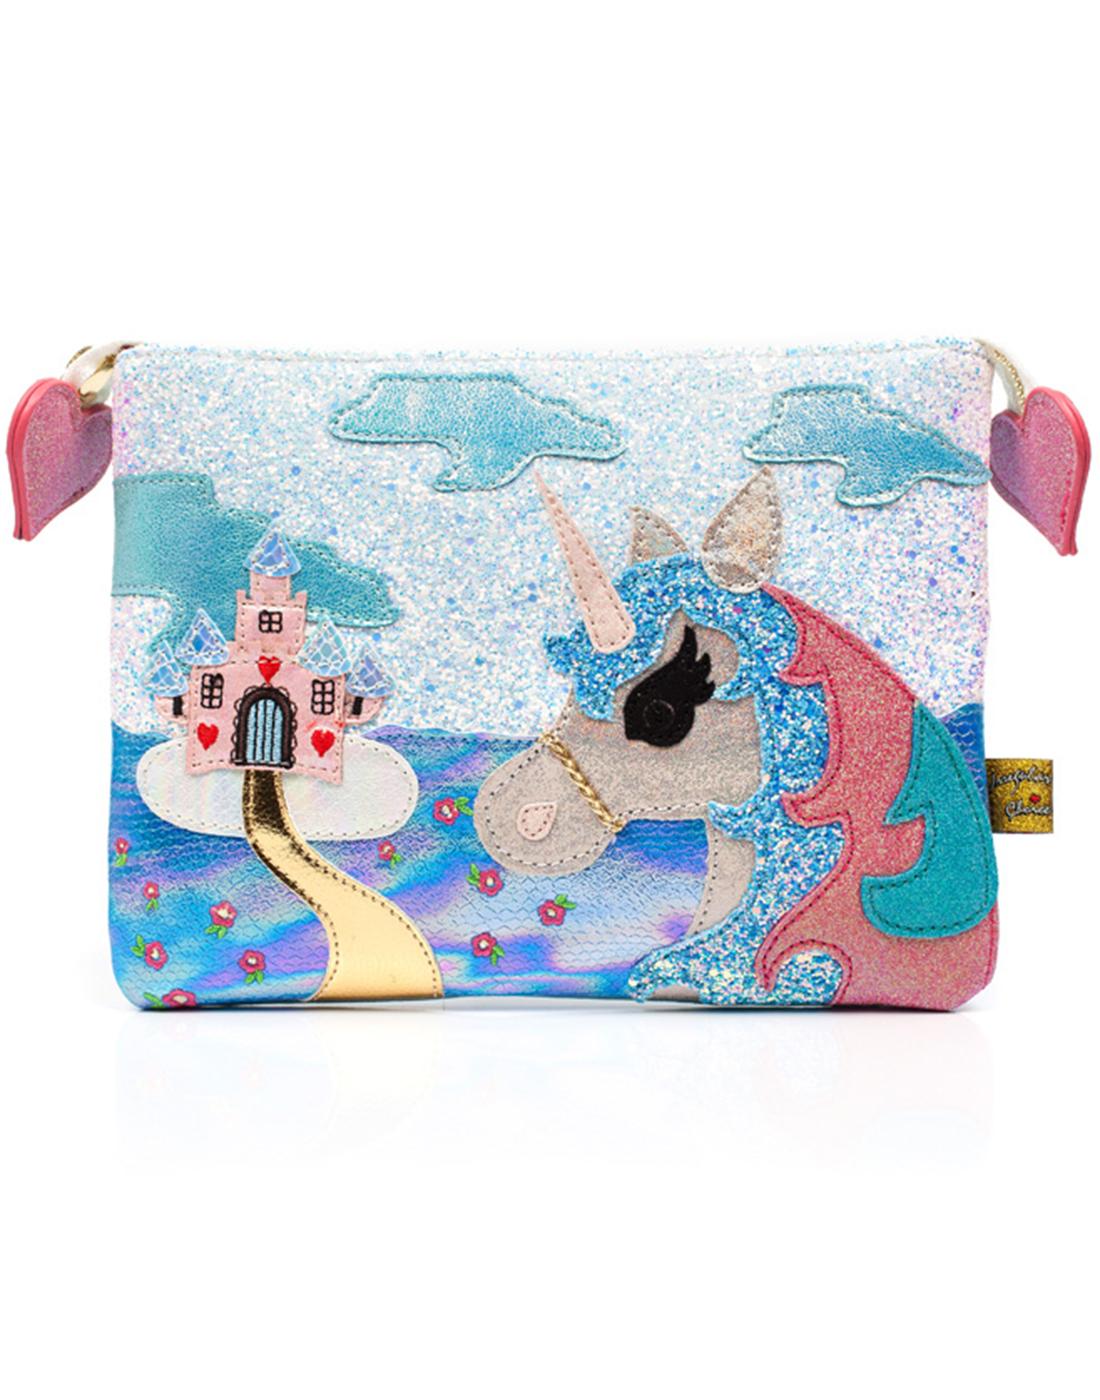 King Of The Castle IRREGULAR CHOICE Pouch White